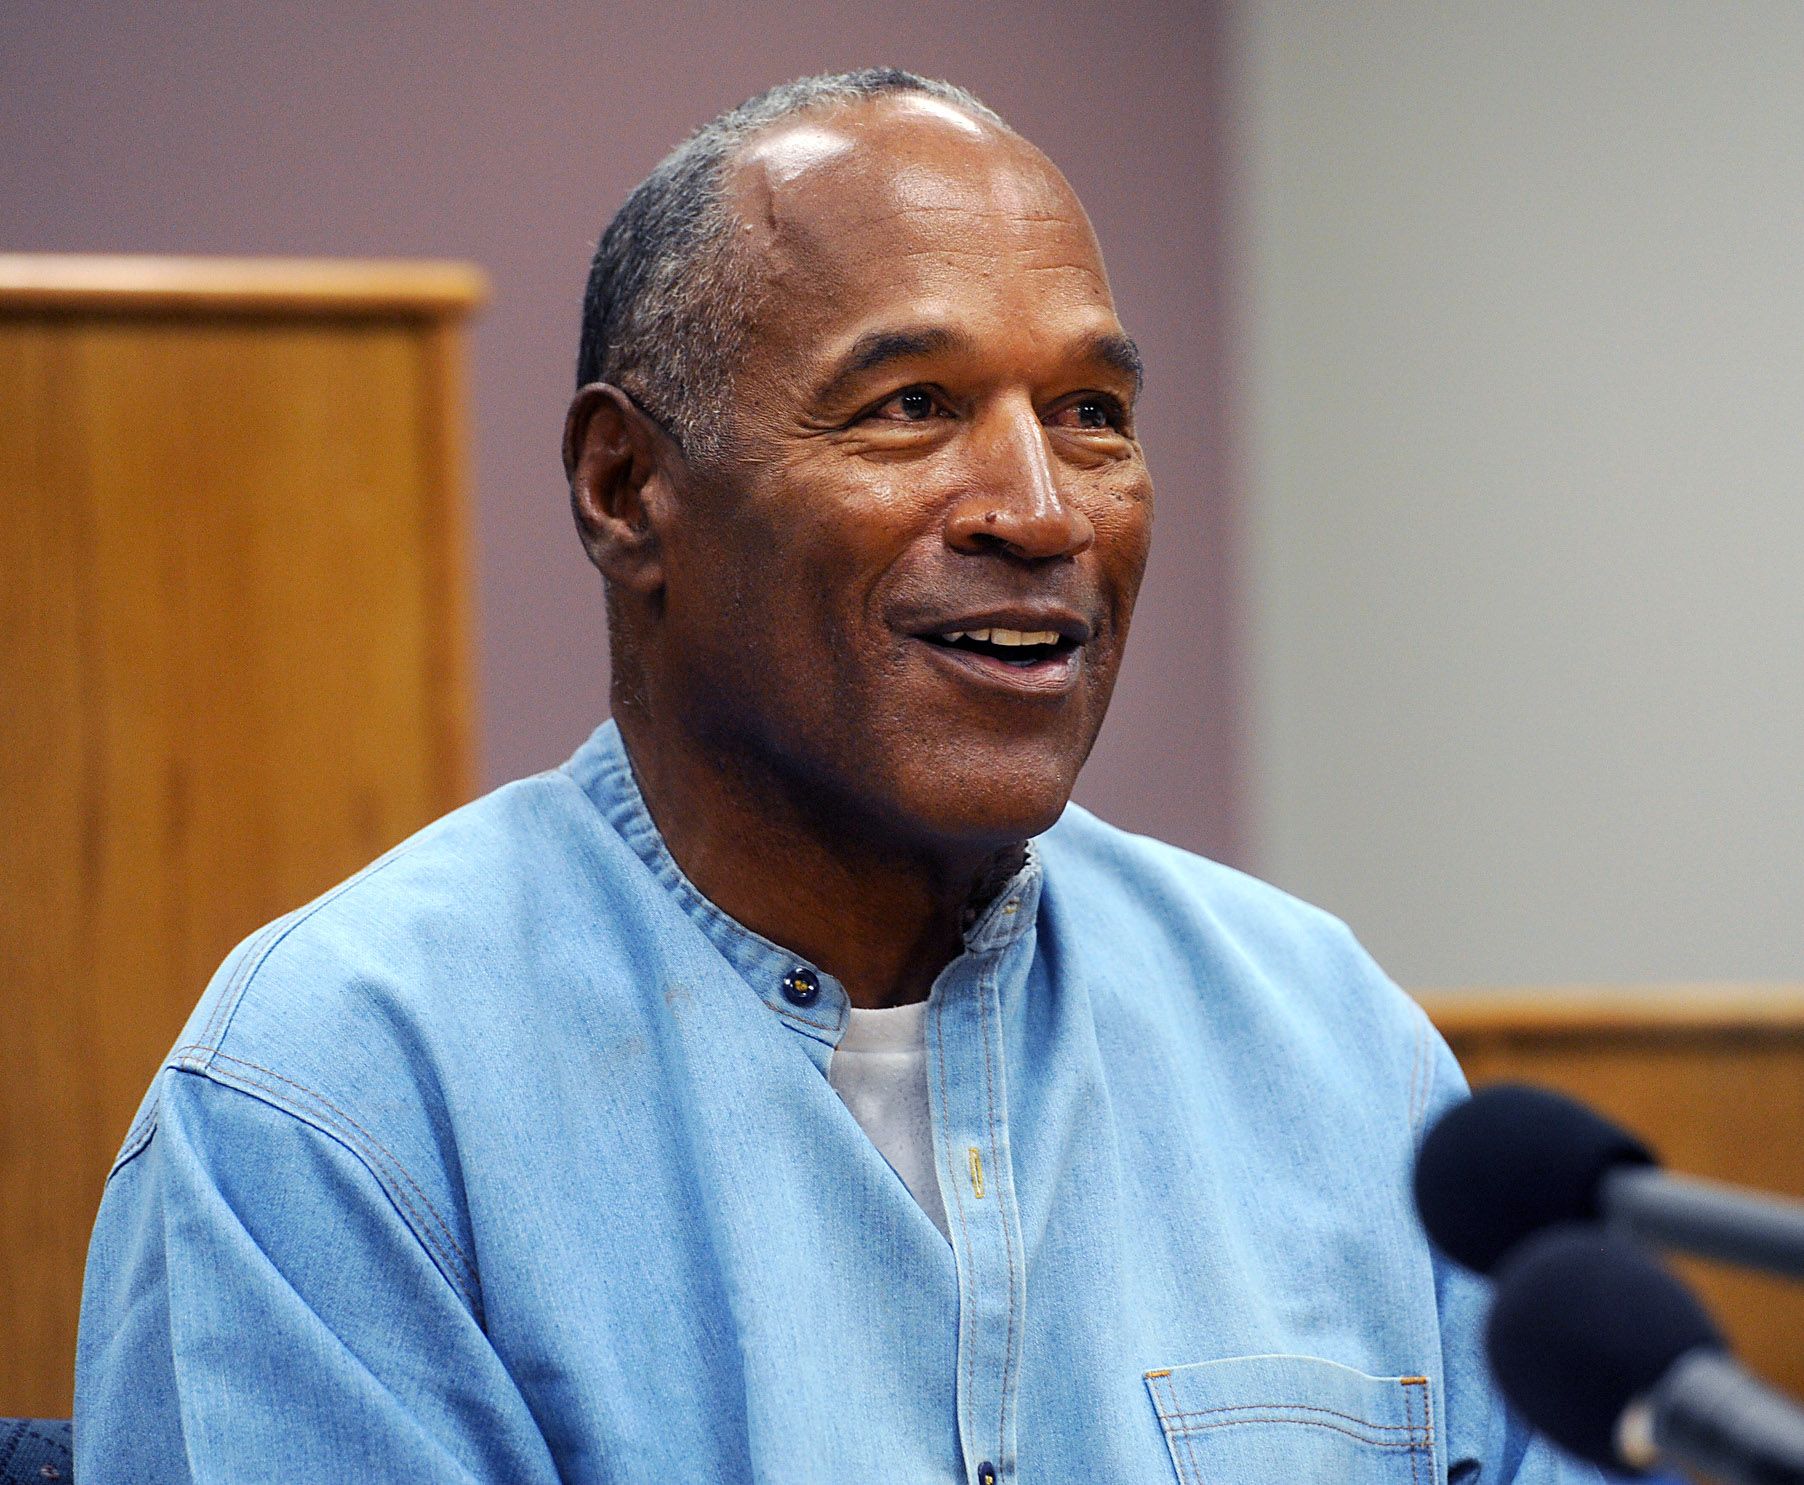 Oj Simpson Net Worth, Source, Car Collection, House and More